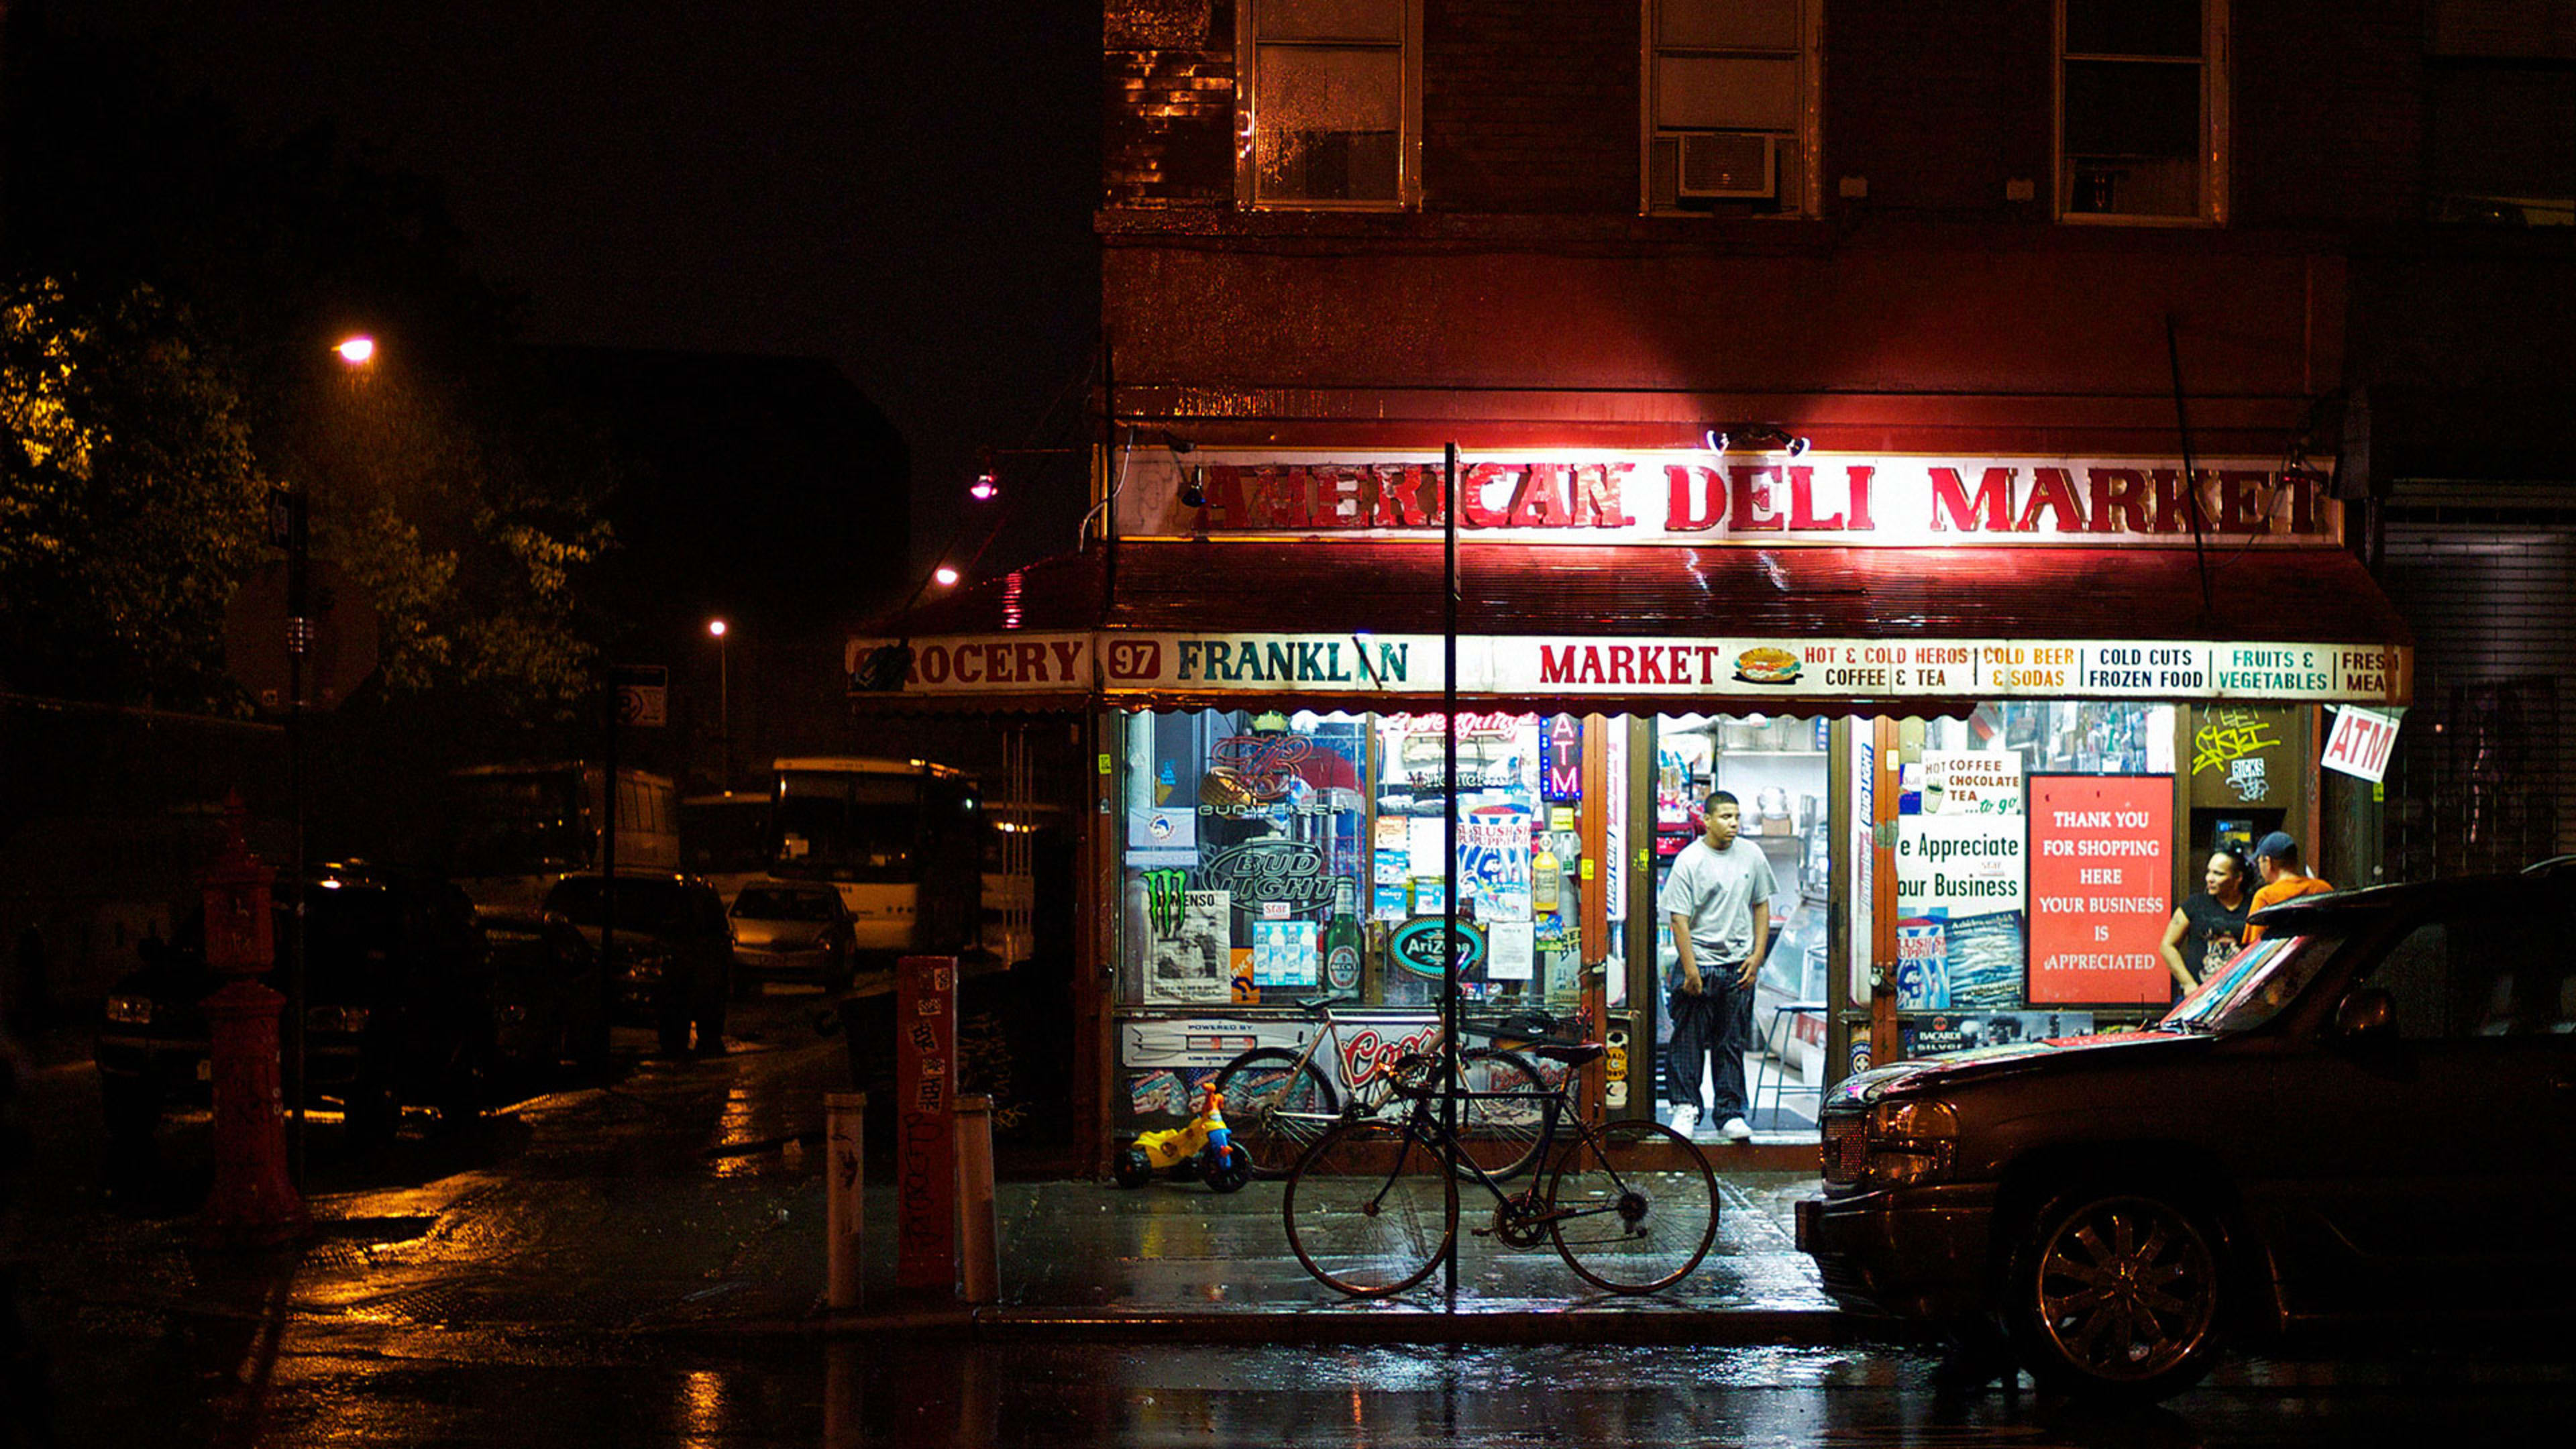 7 Lessons White People Can Learn From Bodega’s Apology